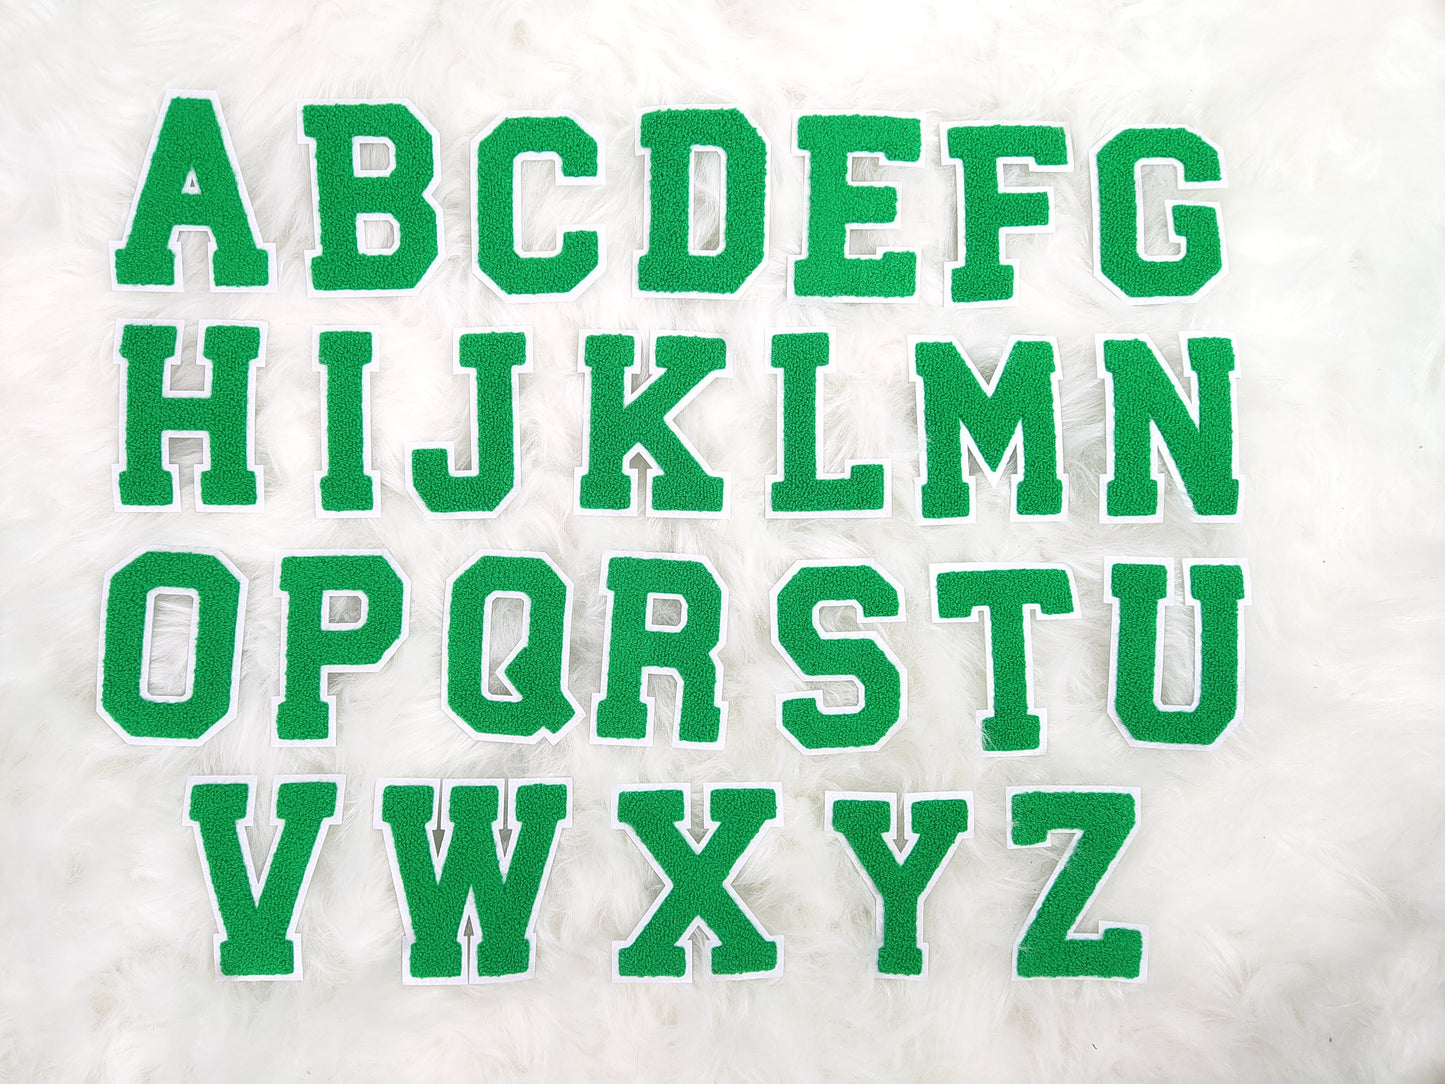 Green Chenille on Felt Iron On Letter Patches